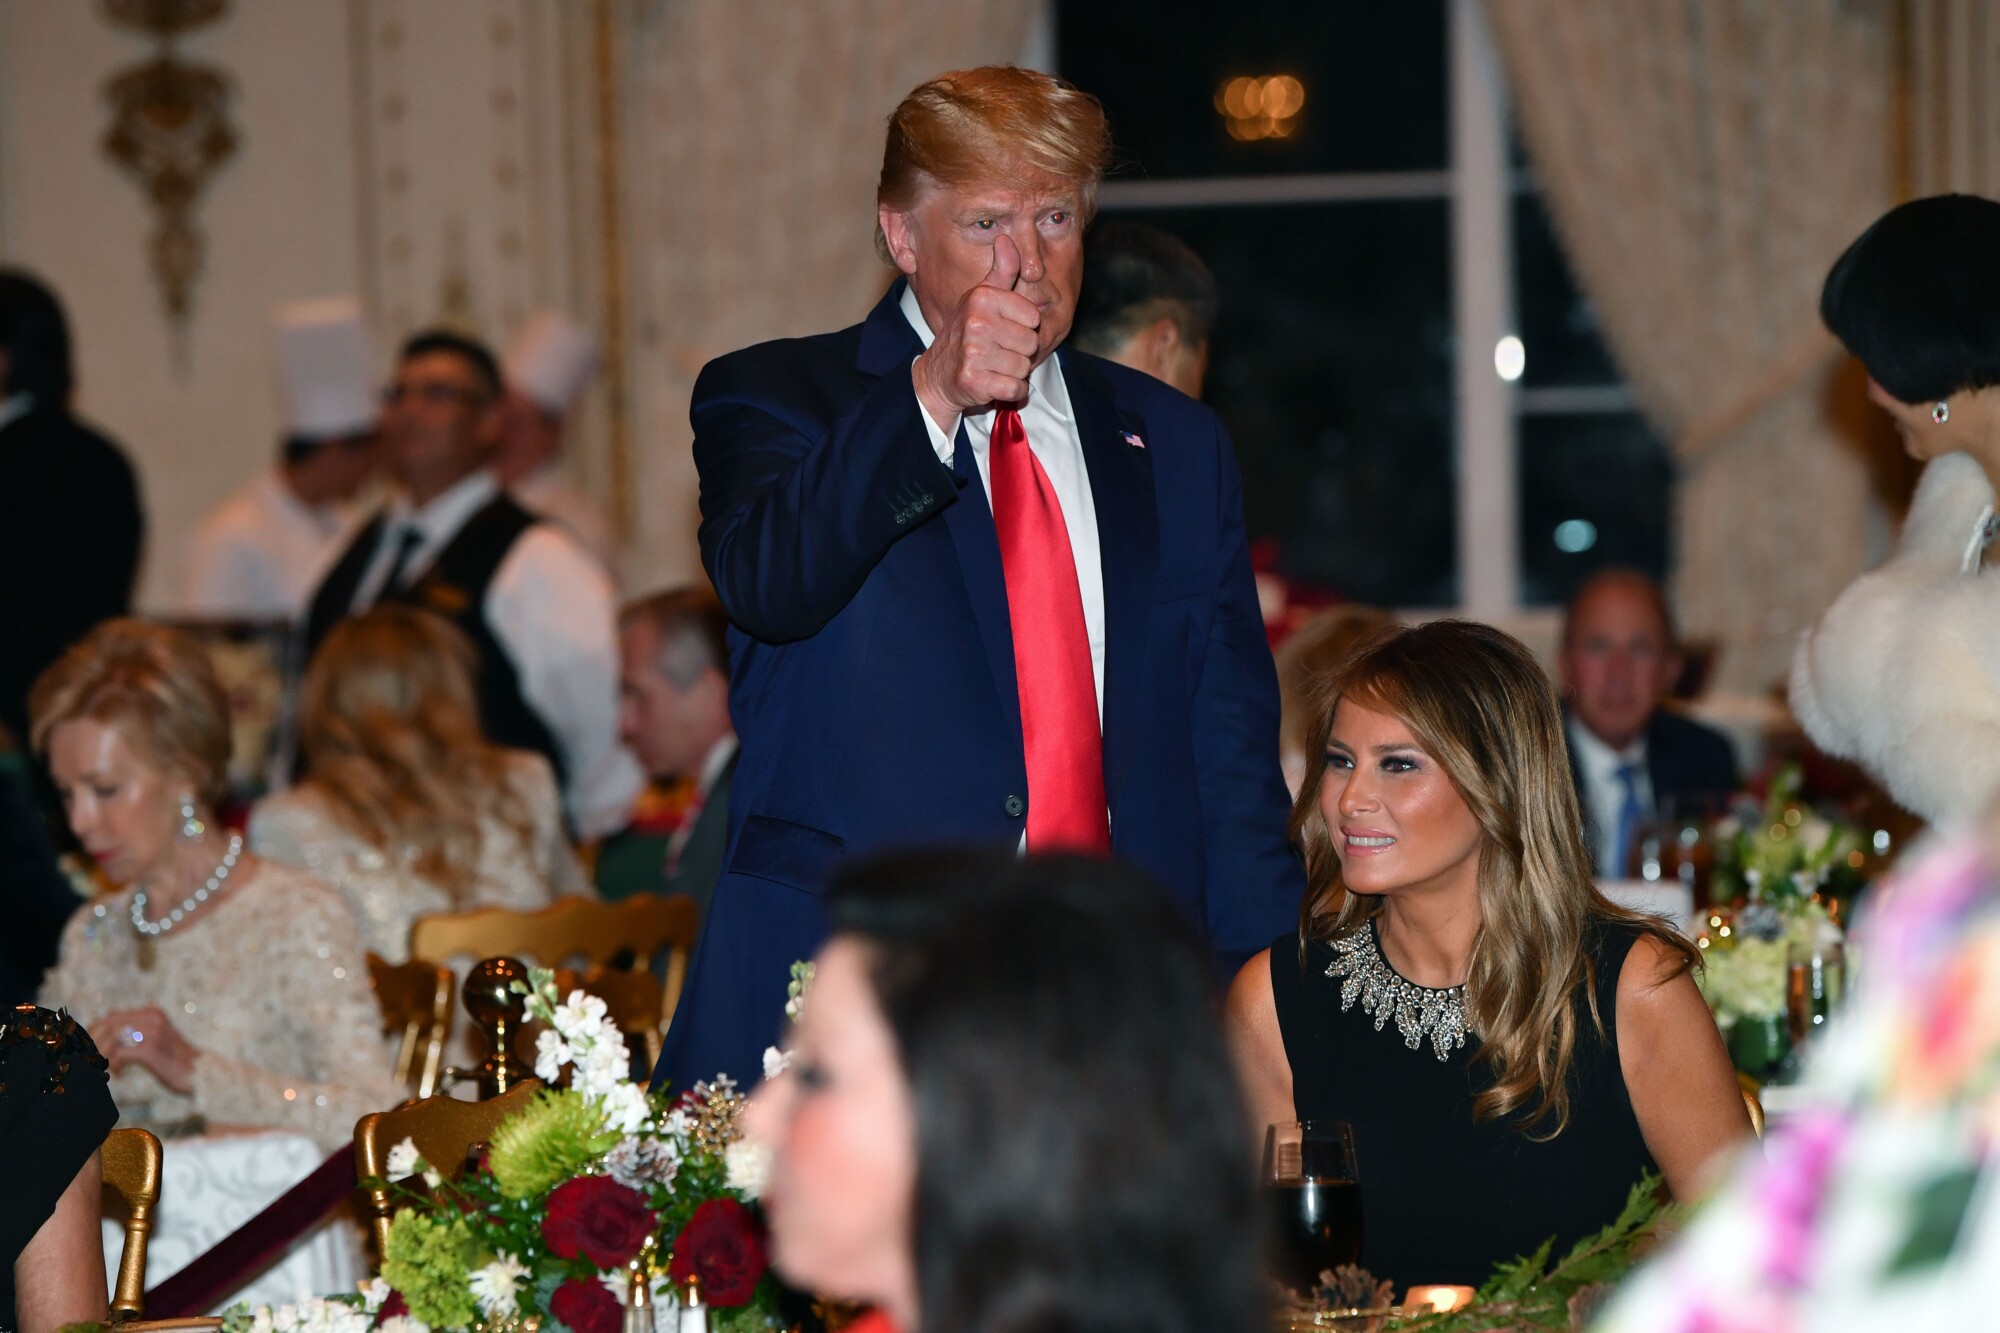 Palm Beach Town Attorney Sides With Trump in Mar-a-Lago Residency